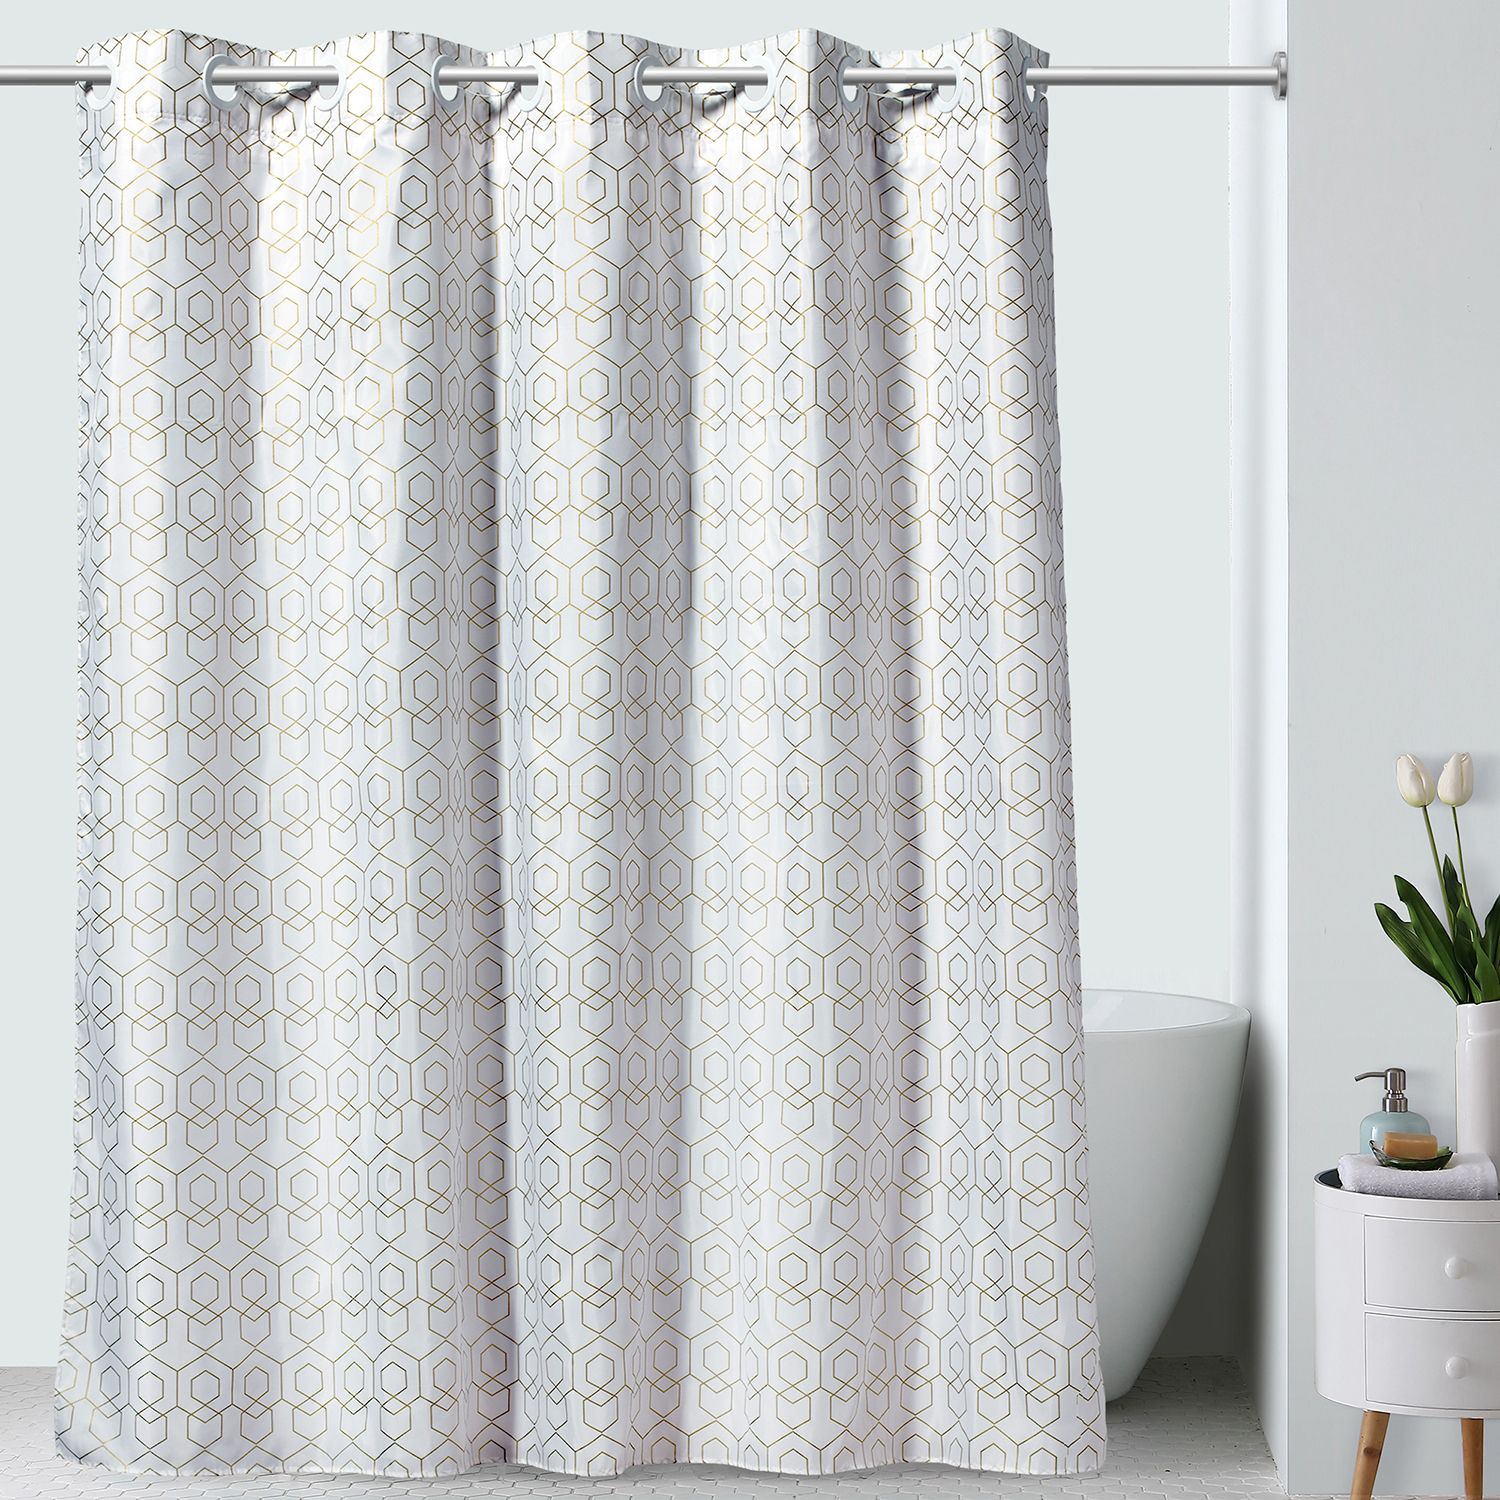 Image for Hookless Premium Shower Curtain, Gold Geometric Print with Fabric Liner at Kohl's.